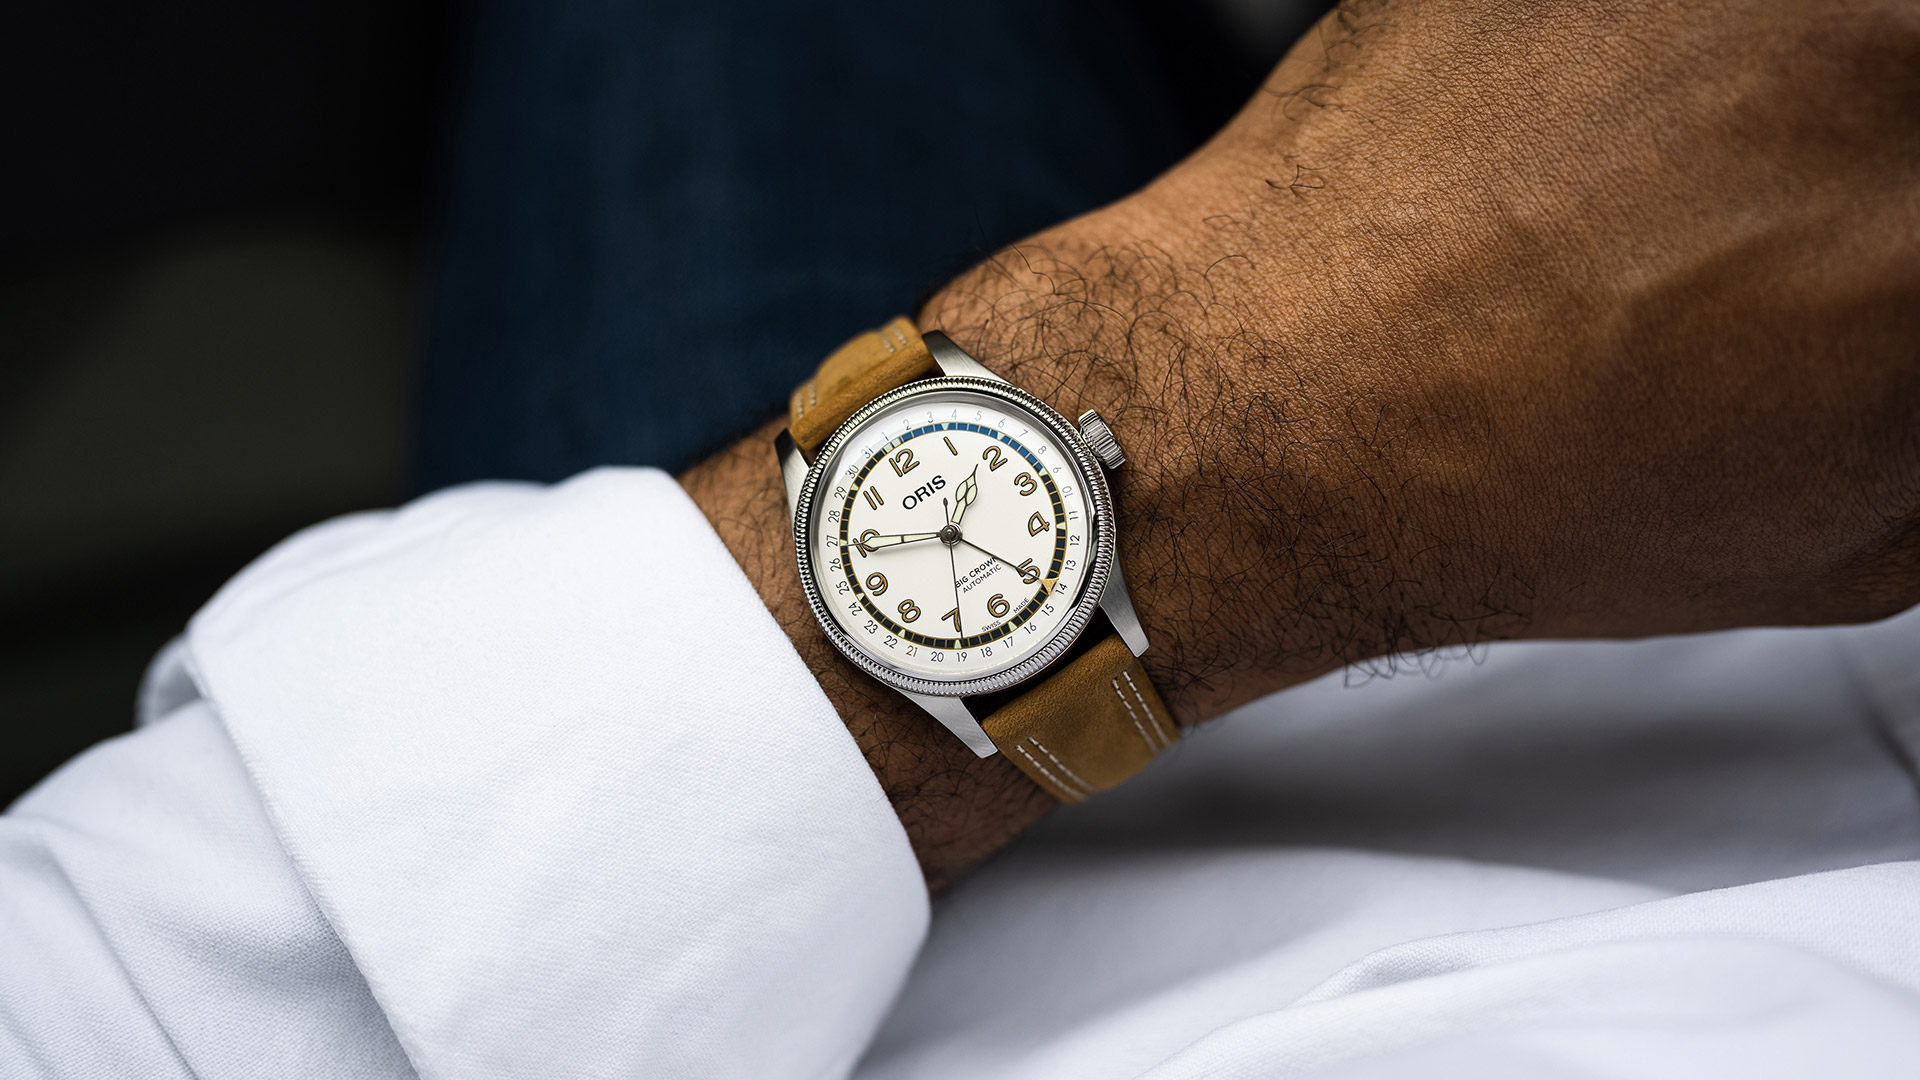 ﻿Oris’ Roberto Clemente Limited Edition Watch